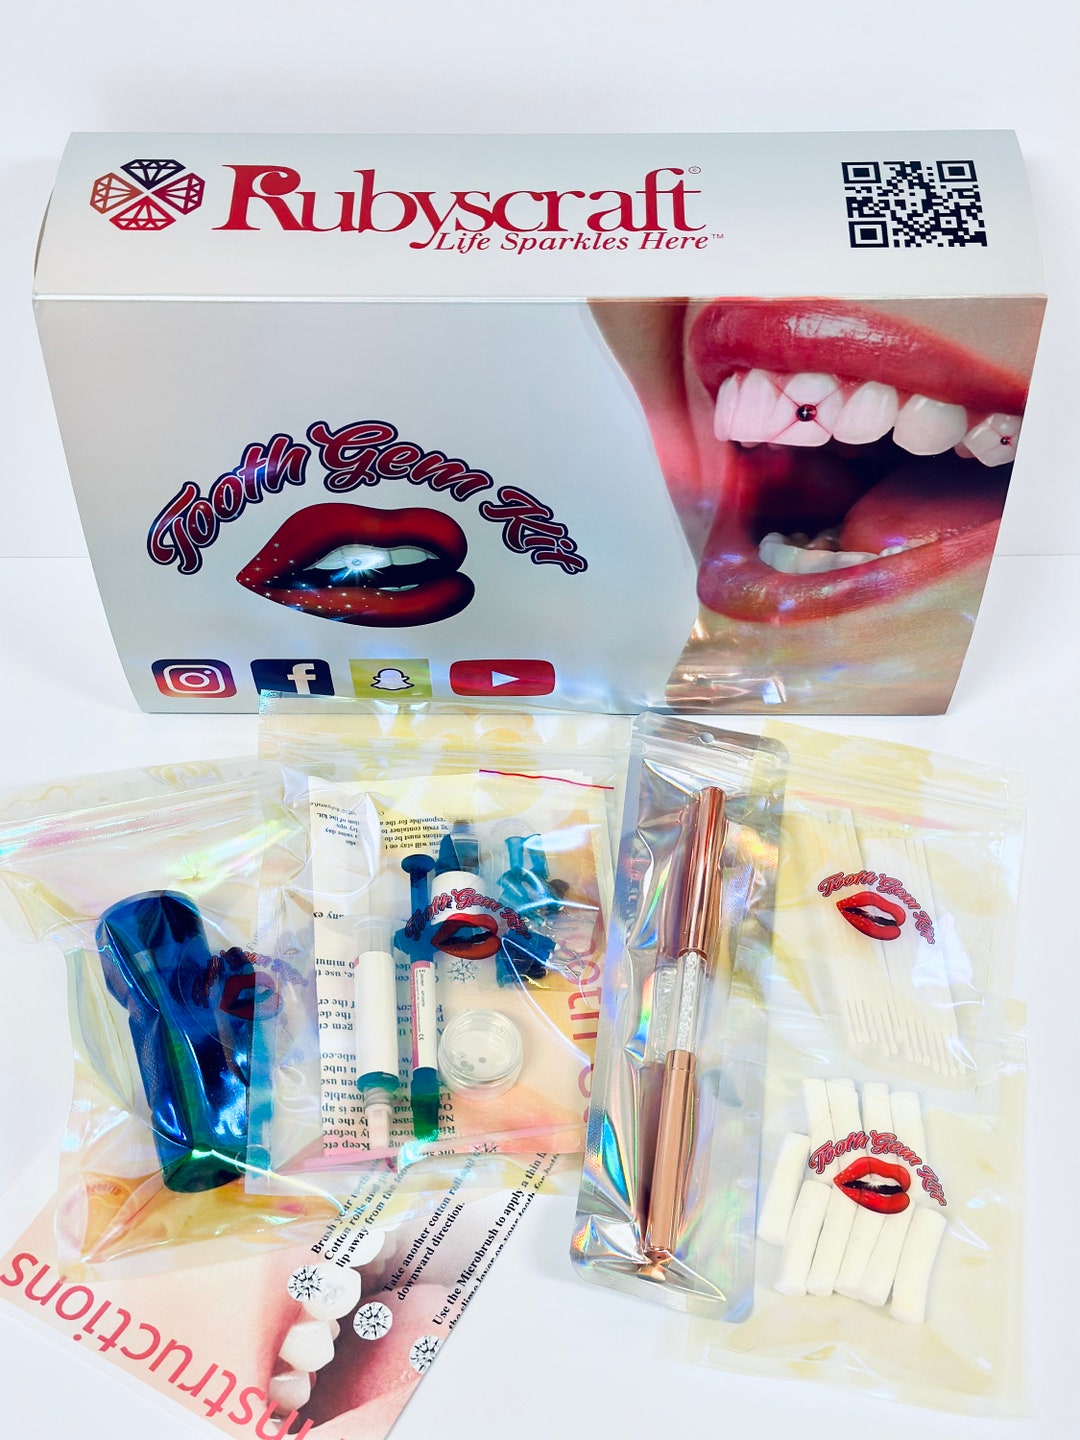 Tooth gem glue, primer, Blue etch and our starter kit for tooth